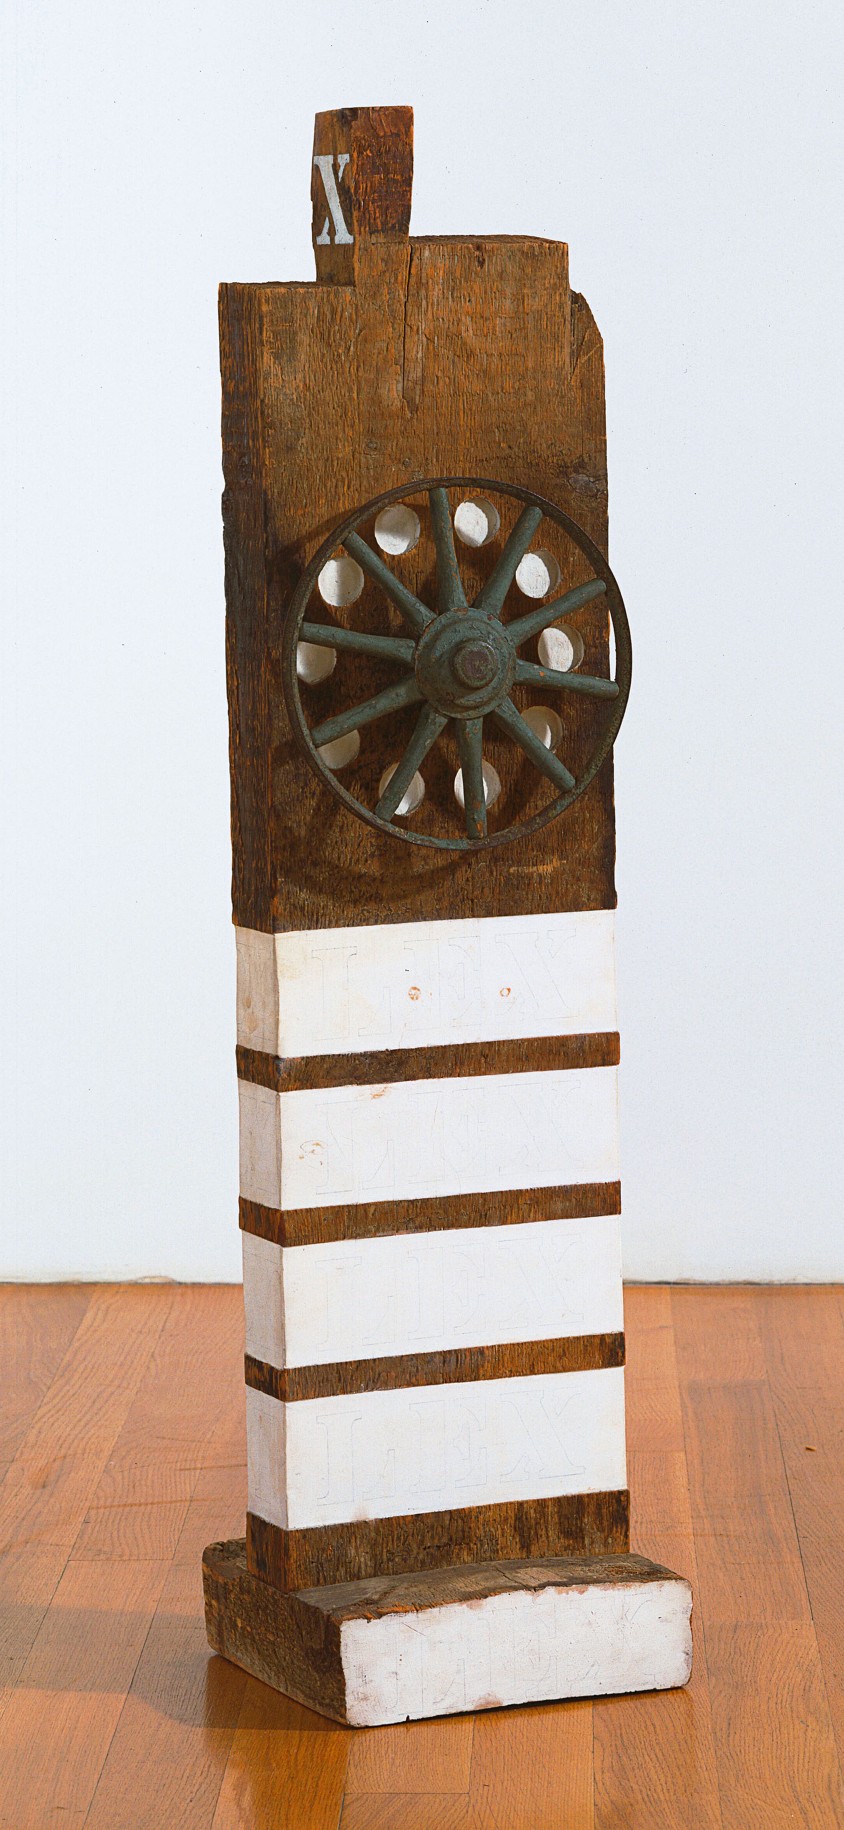 Law, a 44 1/8 by 10 7/8 by 3 1/8 inch sculpture consisting of a wooden beam with a haunched tenon on a wooden base. An iron wheel is affixed to the upper half of the front of the work; in between each spoke is a white painted orb. Four white stripes are painted around the bottom half of the sculpture, and the front of the base is also painted white.